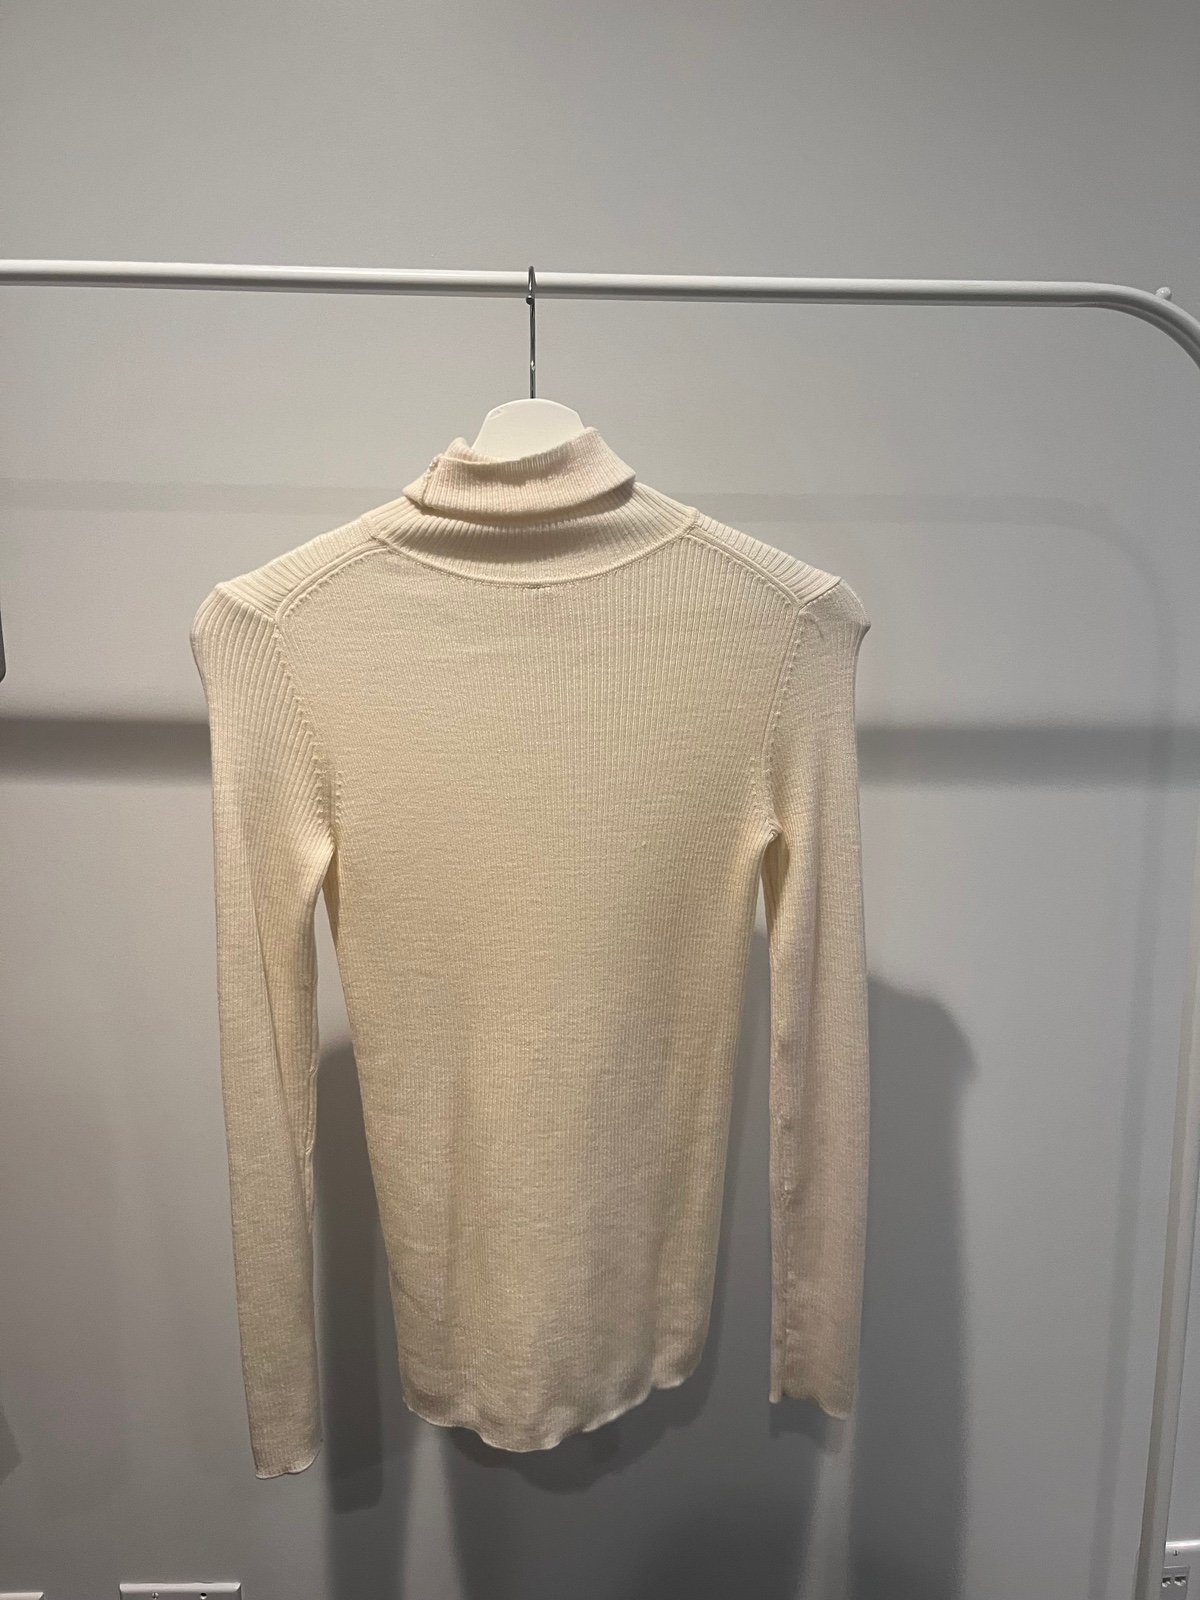 The Best Seller Uniqlo Turtle neck sweater lw18pE0RH just for you